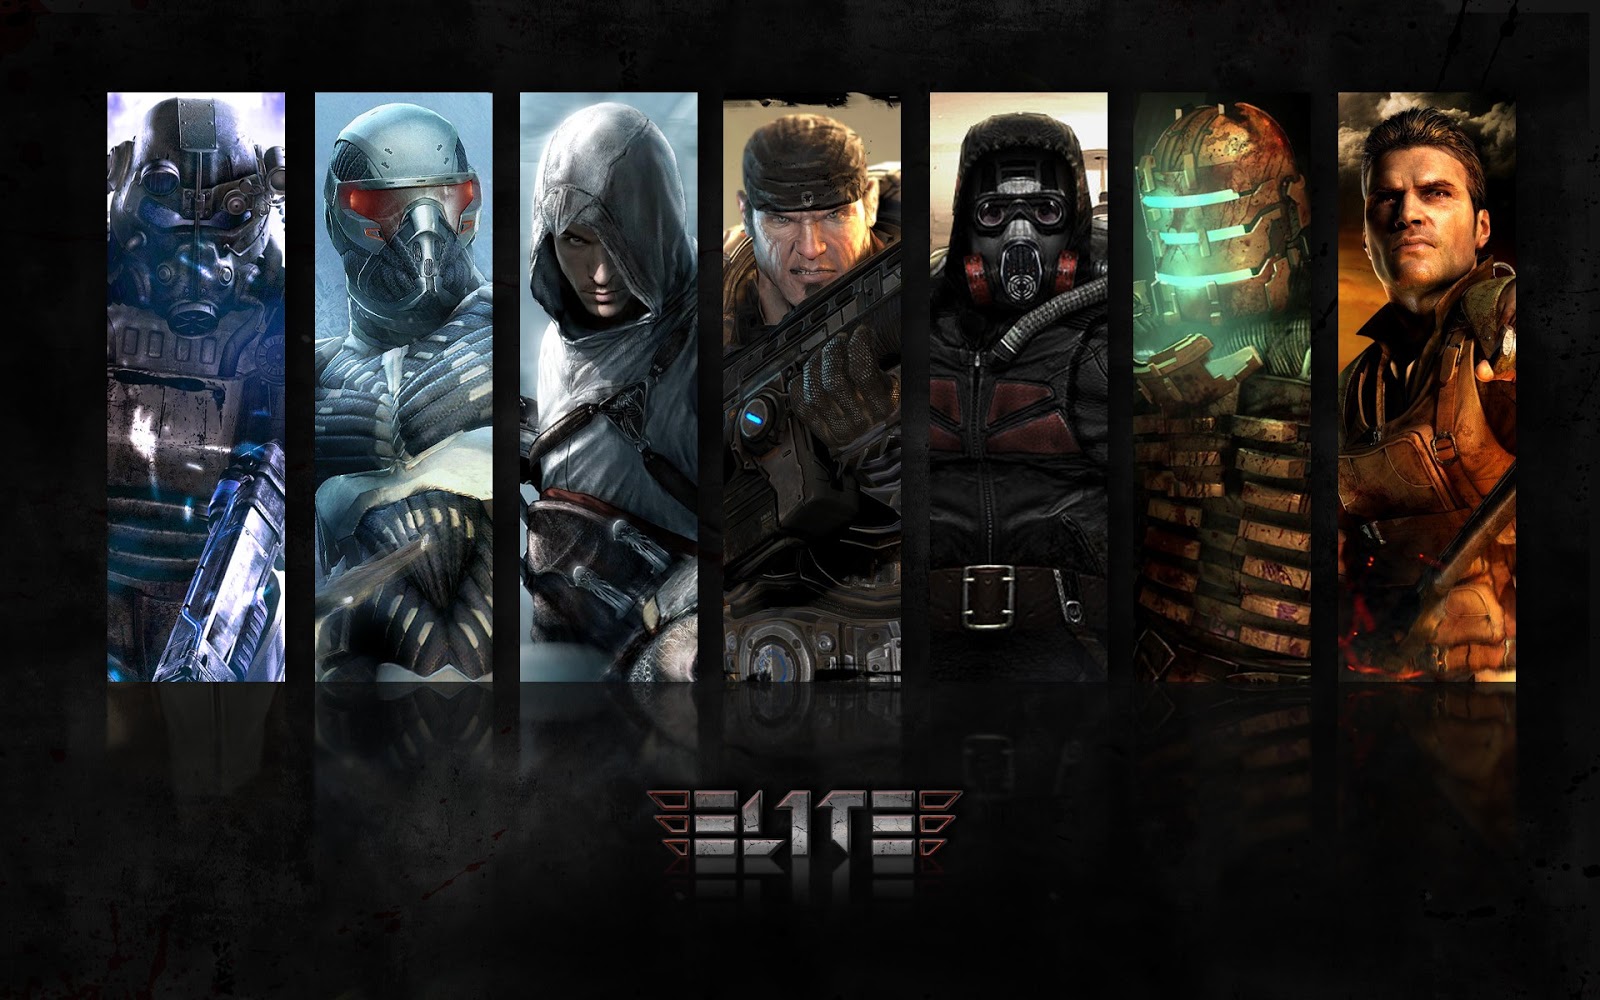  download Top Games Male Characters ELIT3 Games Gaming FPS HD 1600x1000